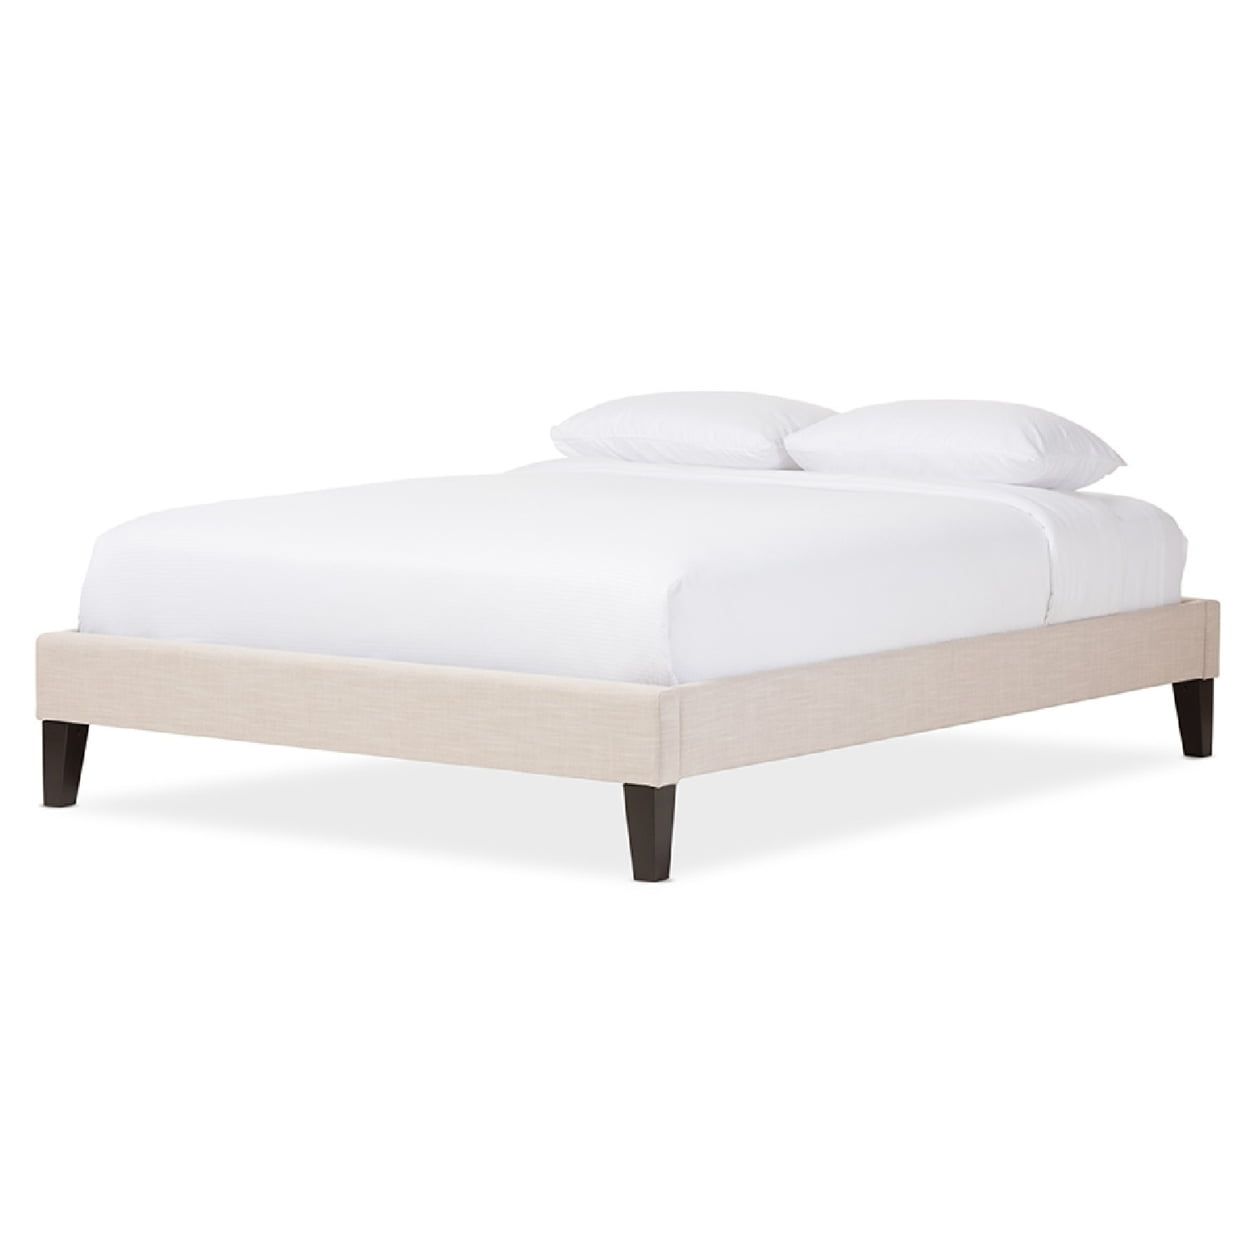 Contemporary Beige Linen Full Bed Frame with Tapered Legs